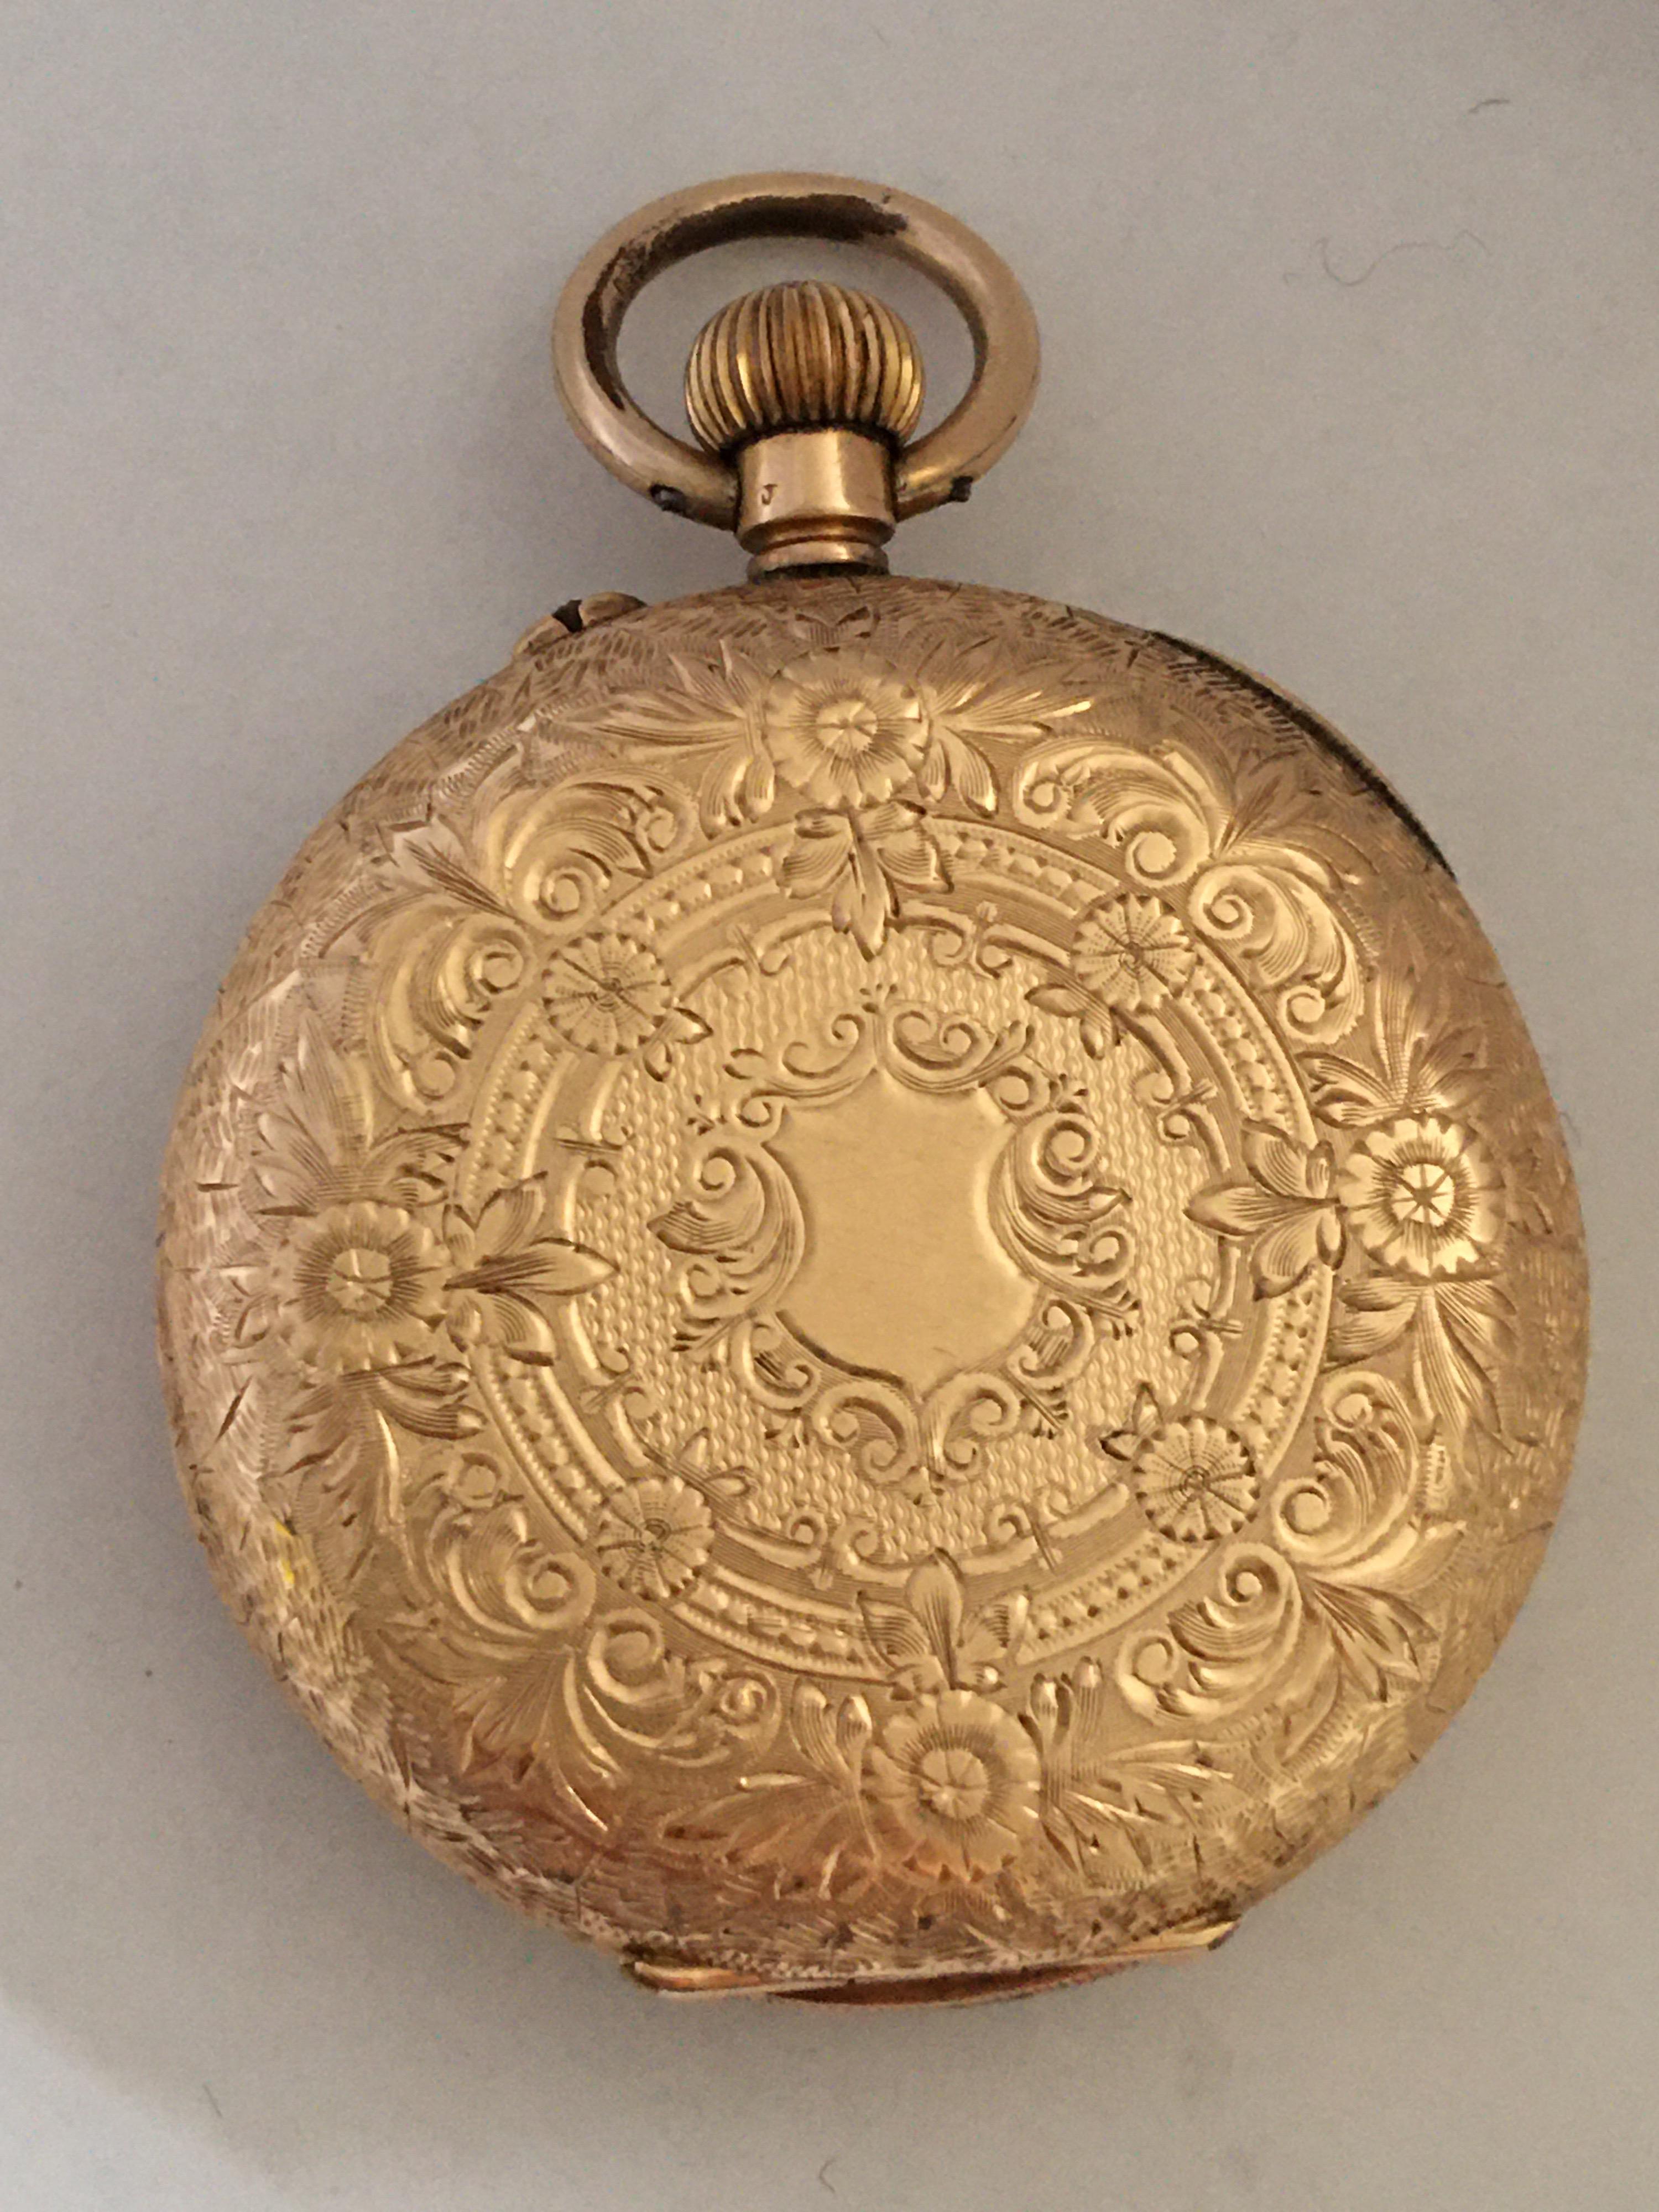 This beautiful antique 38mm diameter mechanical pocket watch is good working condition and is running well. It weigh 43.3 grams. 